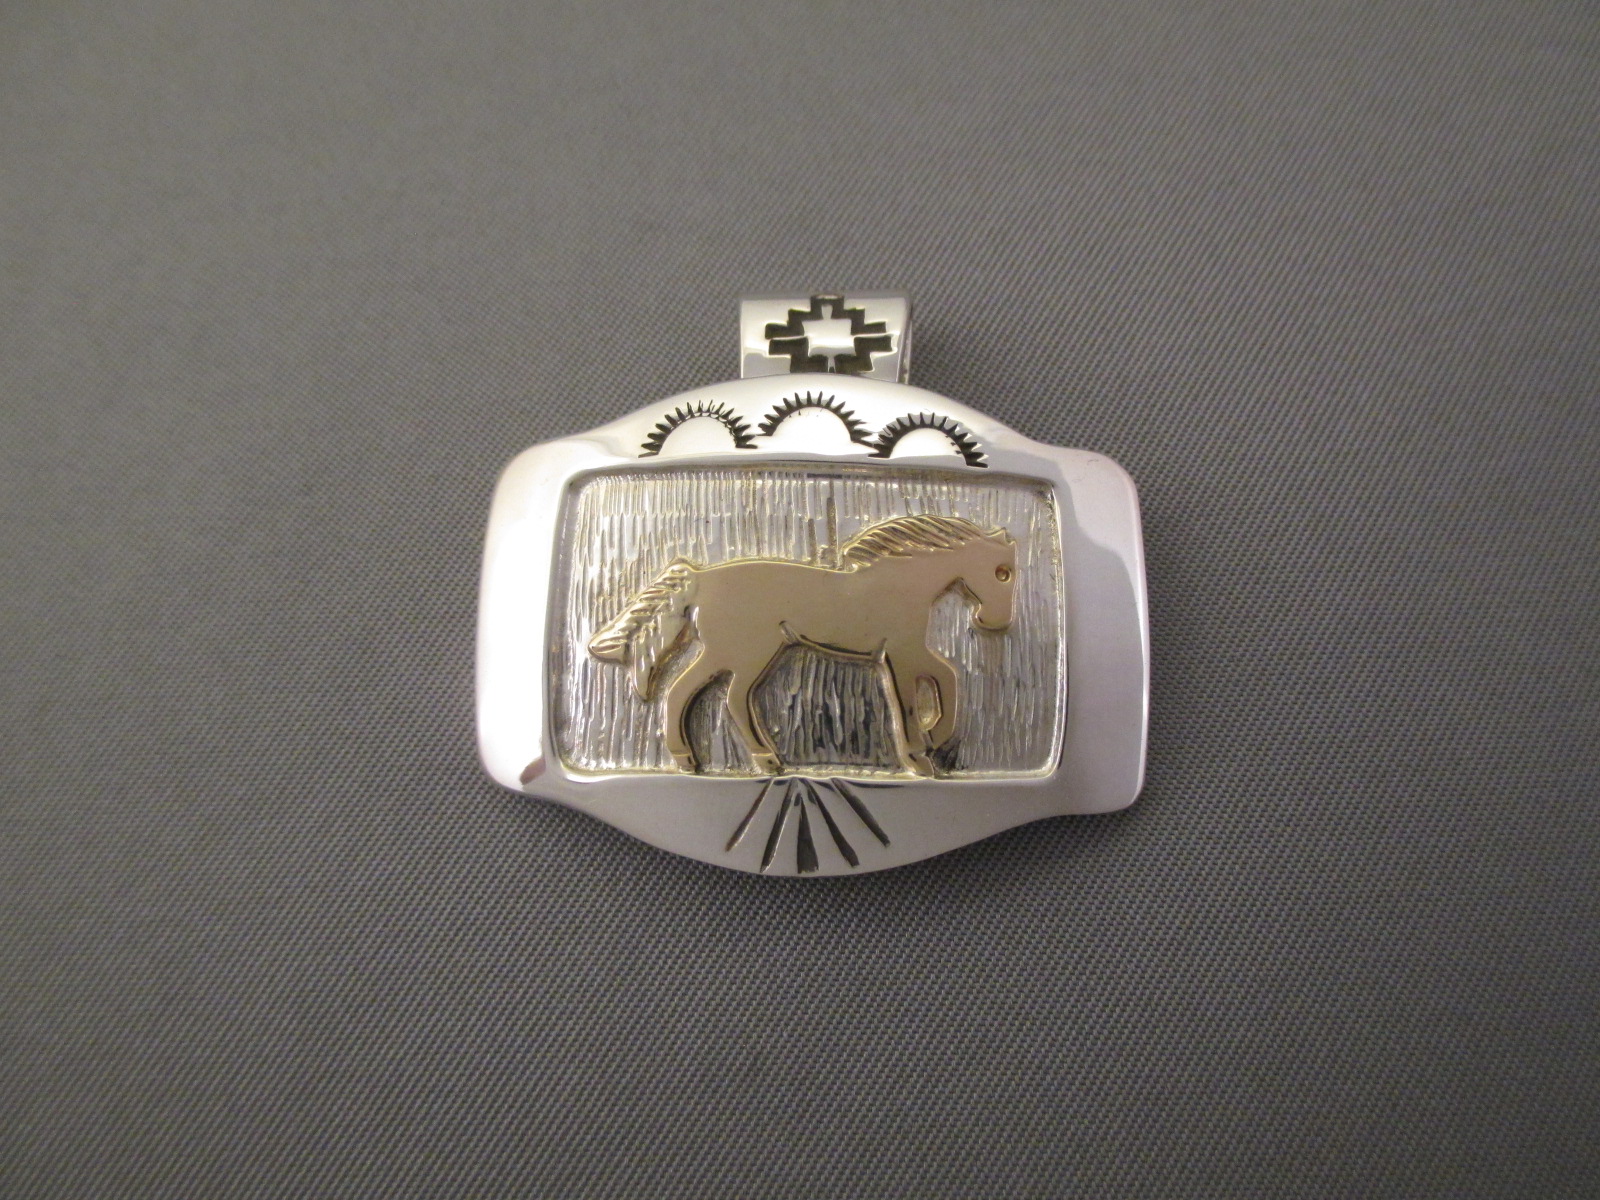 HORSE Pendant - Silver & Gold Horse Pendant by Native American jewelry artist, Fortune Huntinghorse $335-